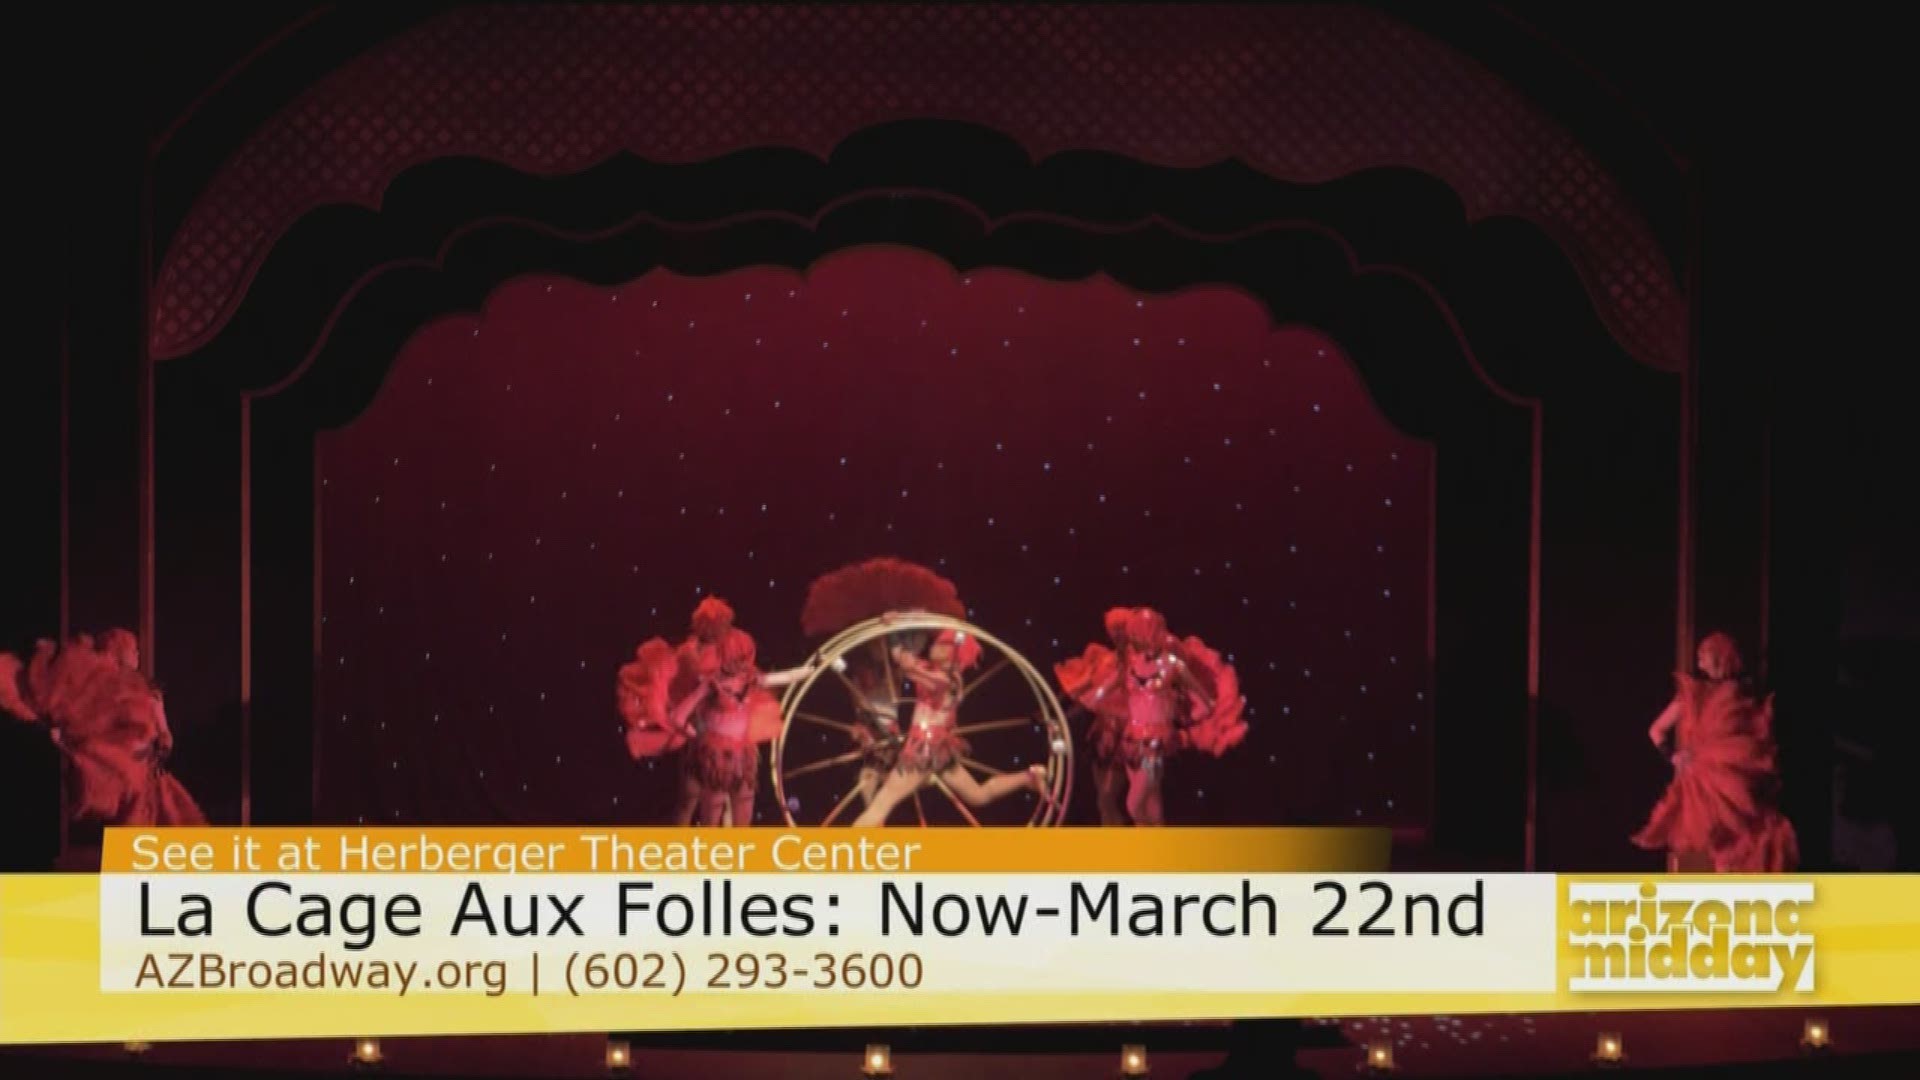 Brad York with Arizona Broadway Theatre gives us a sneak peek of the show "La Cage Aux Folles" & how you can see it for a night out in downtown at Herberger Theater